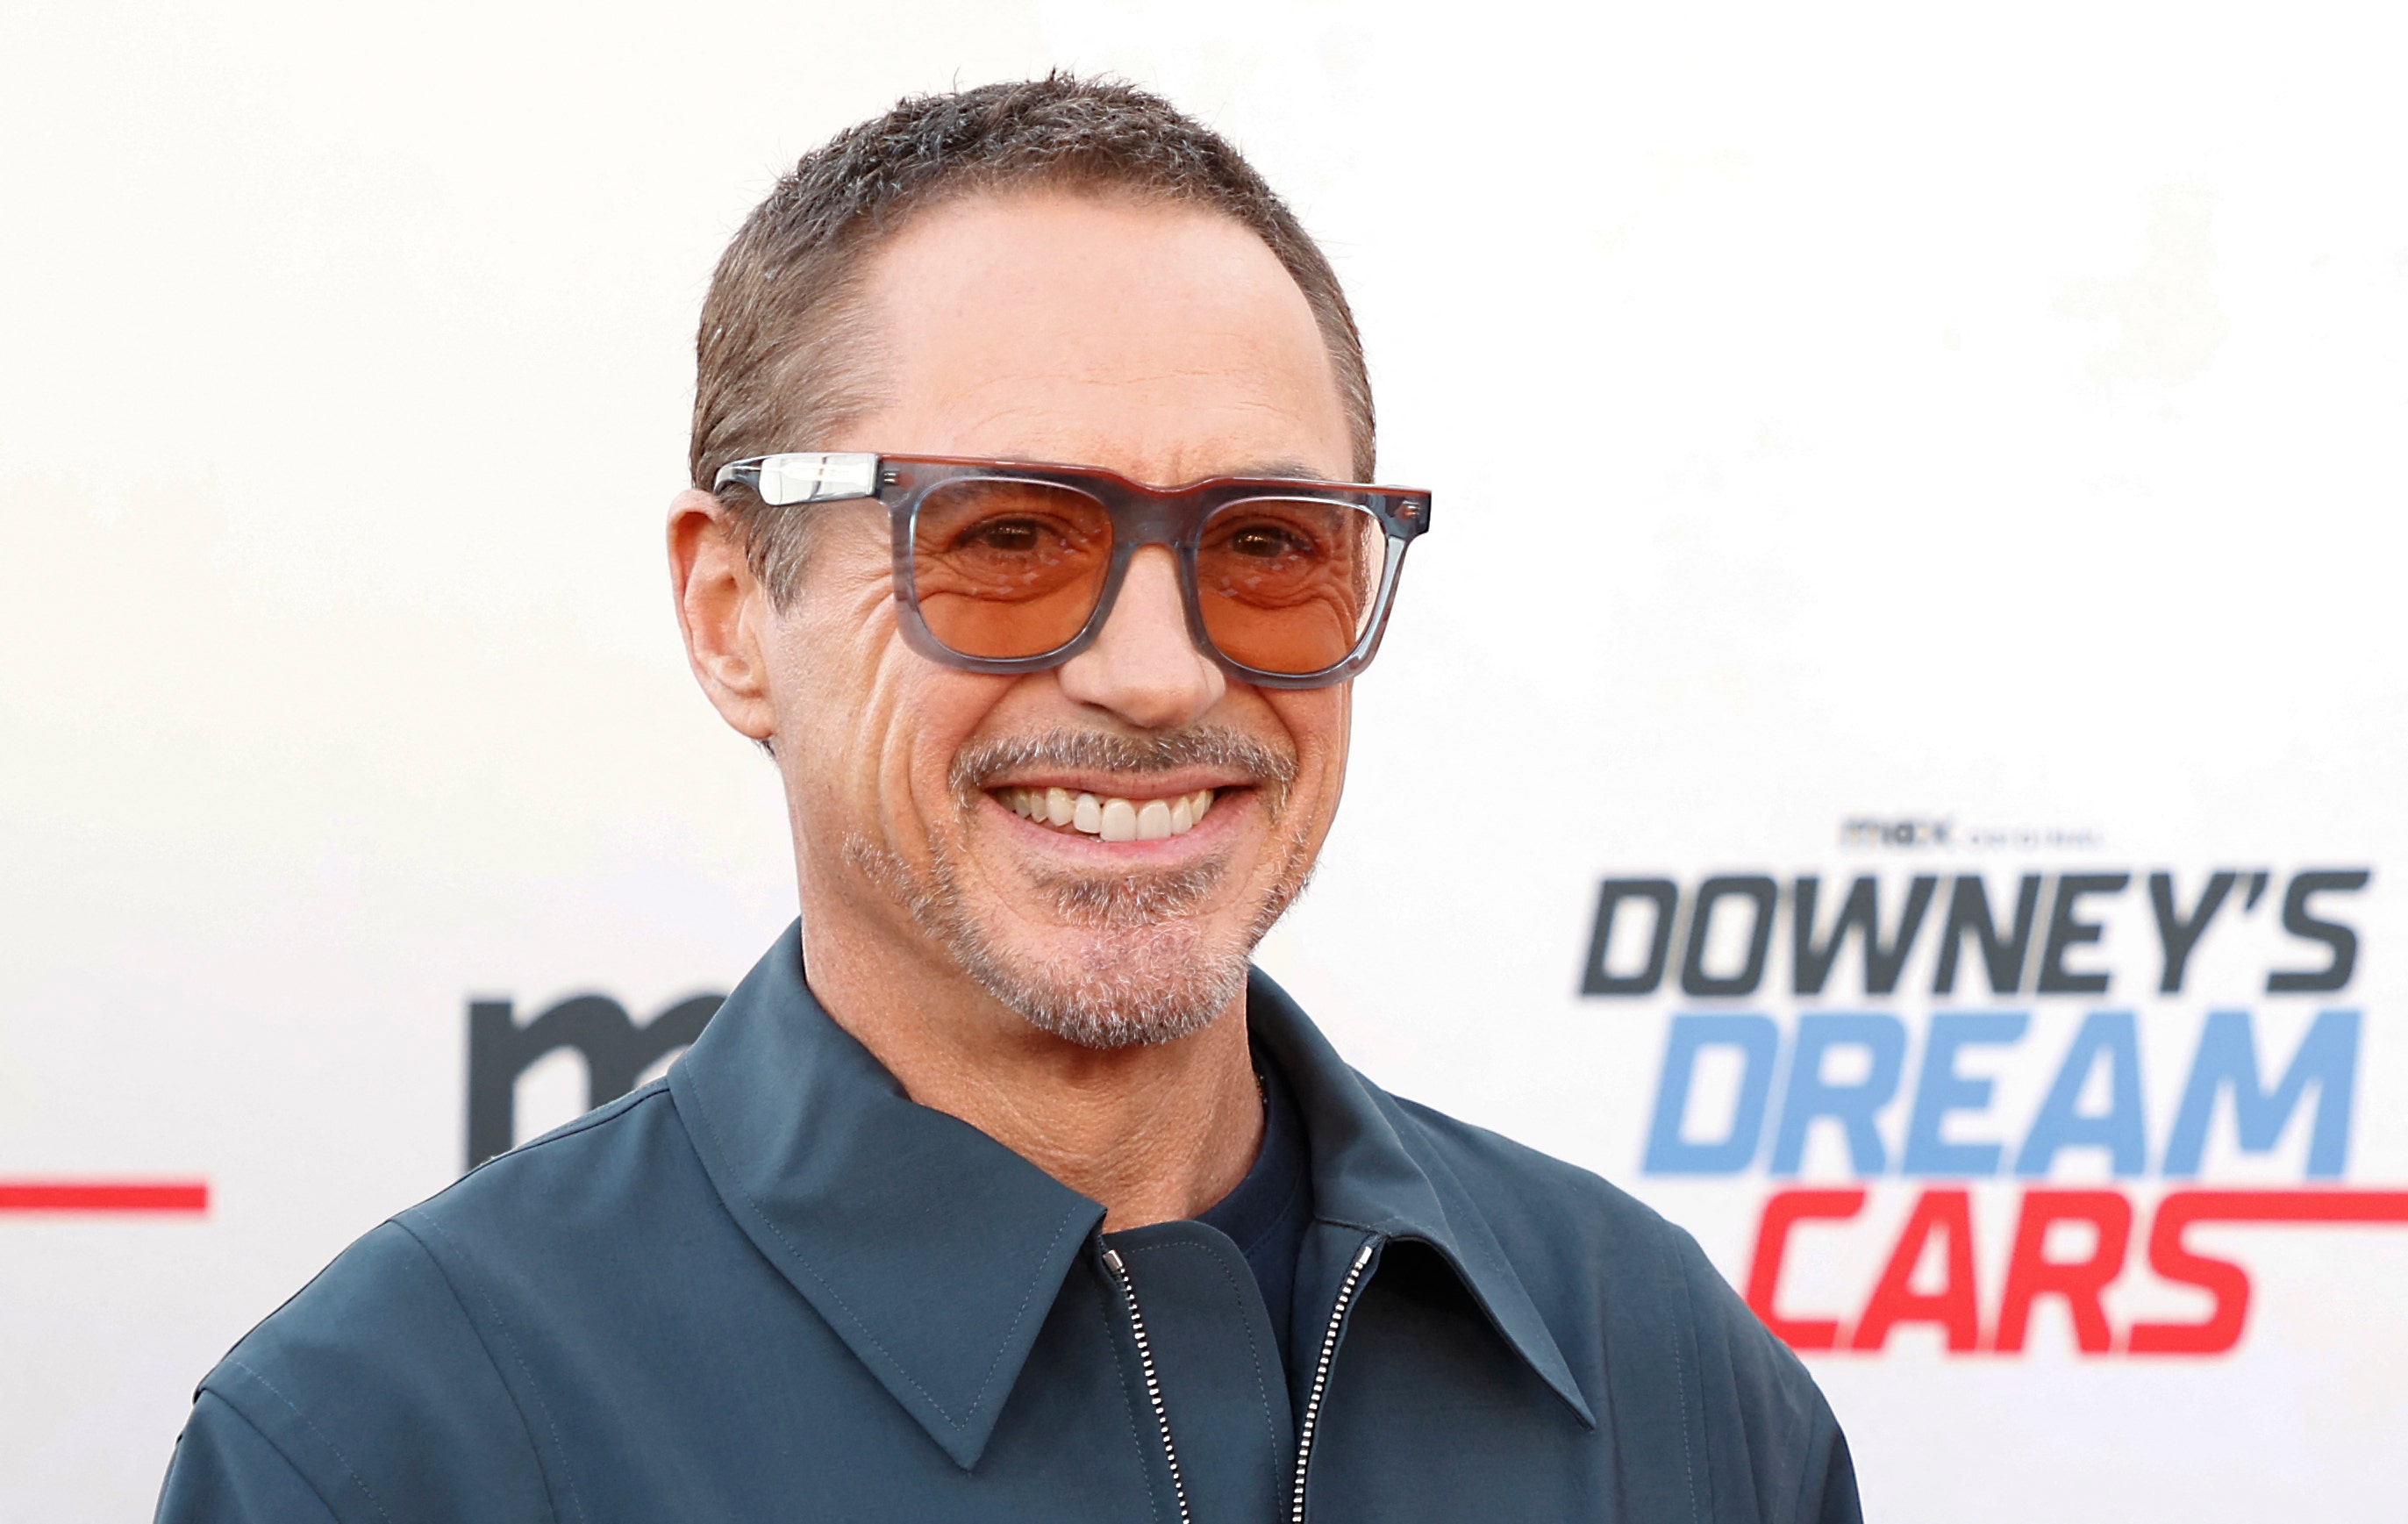 Robert Downey Jr says culture decides ‘who is and isn’t OK’: 'It is baffling'